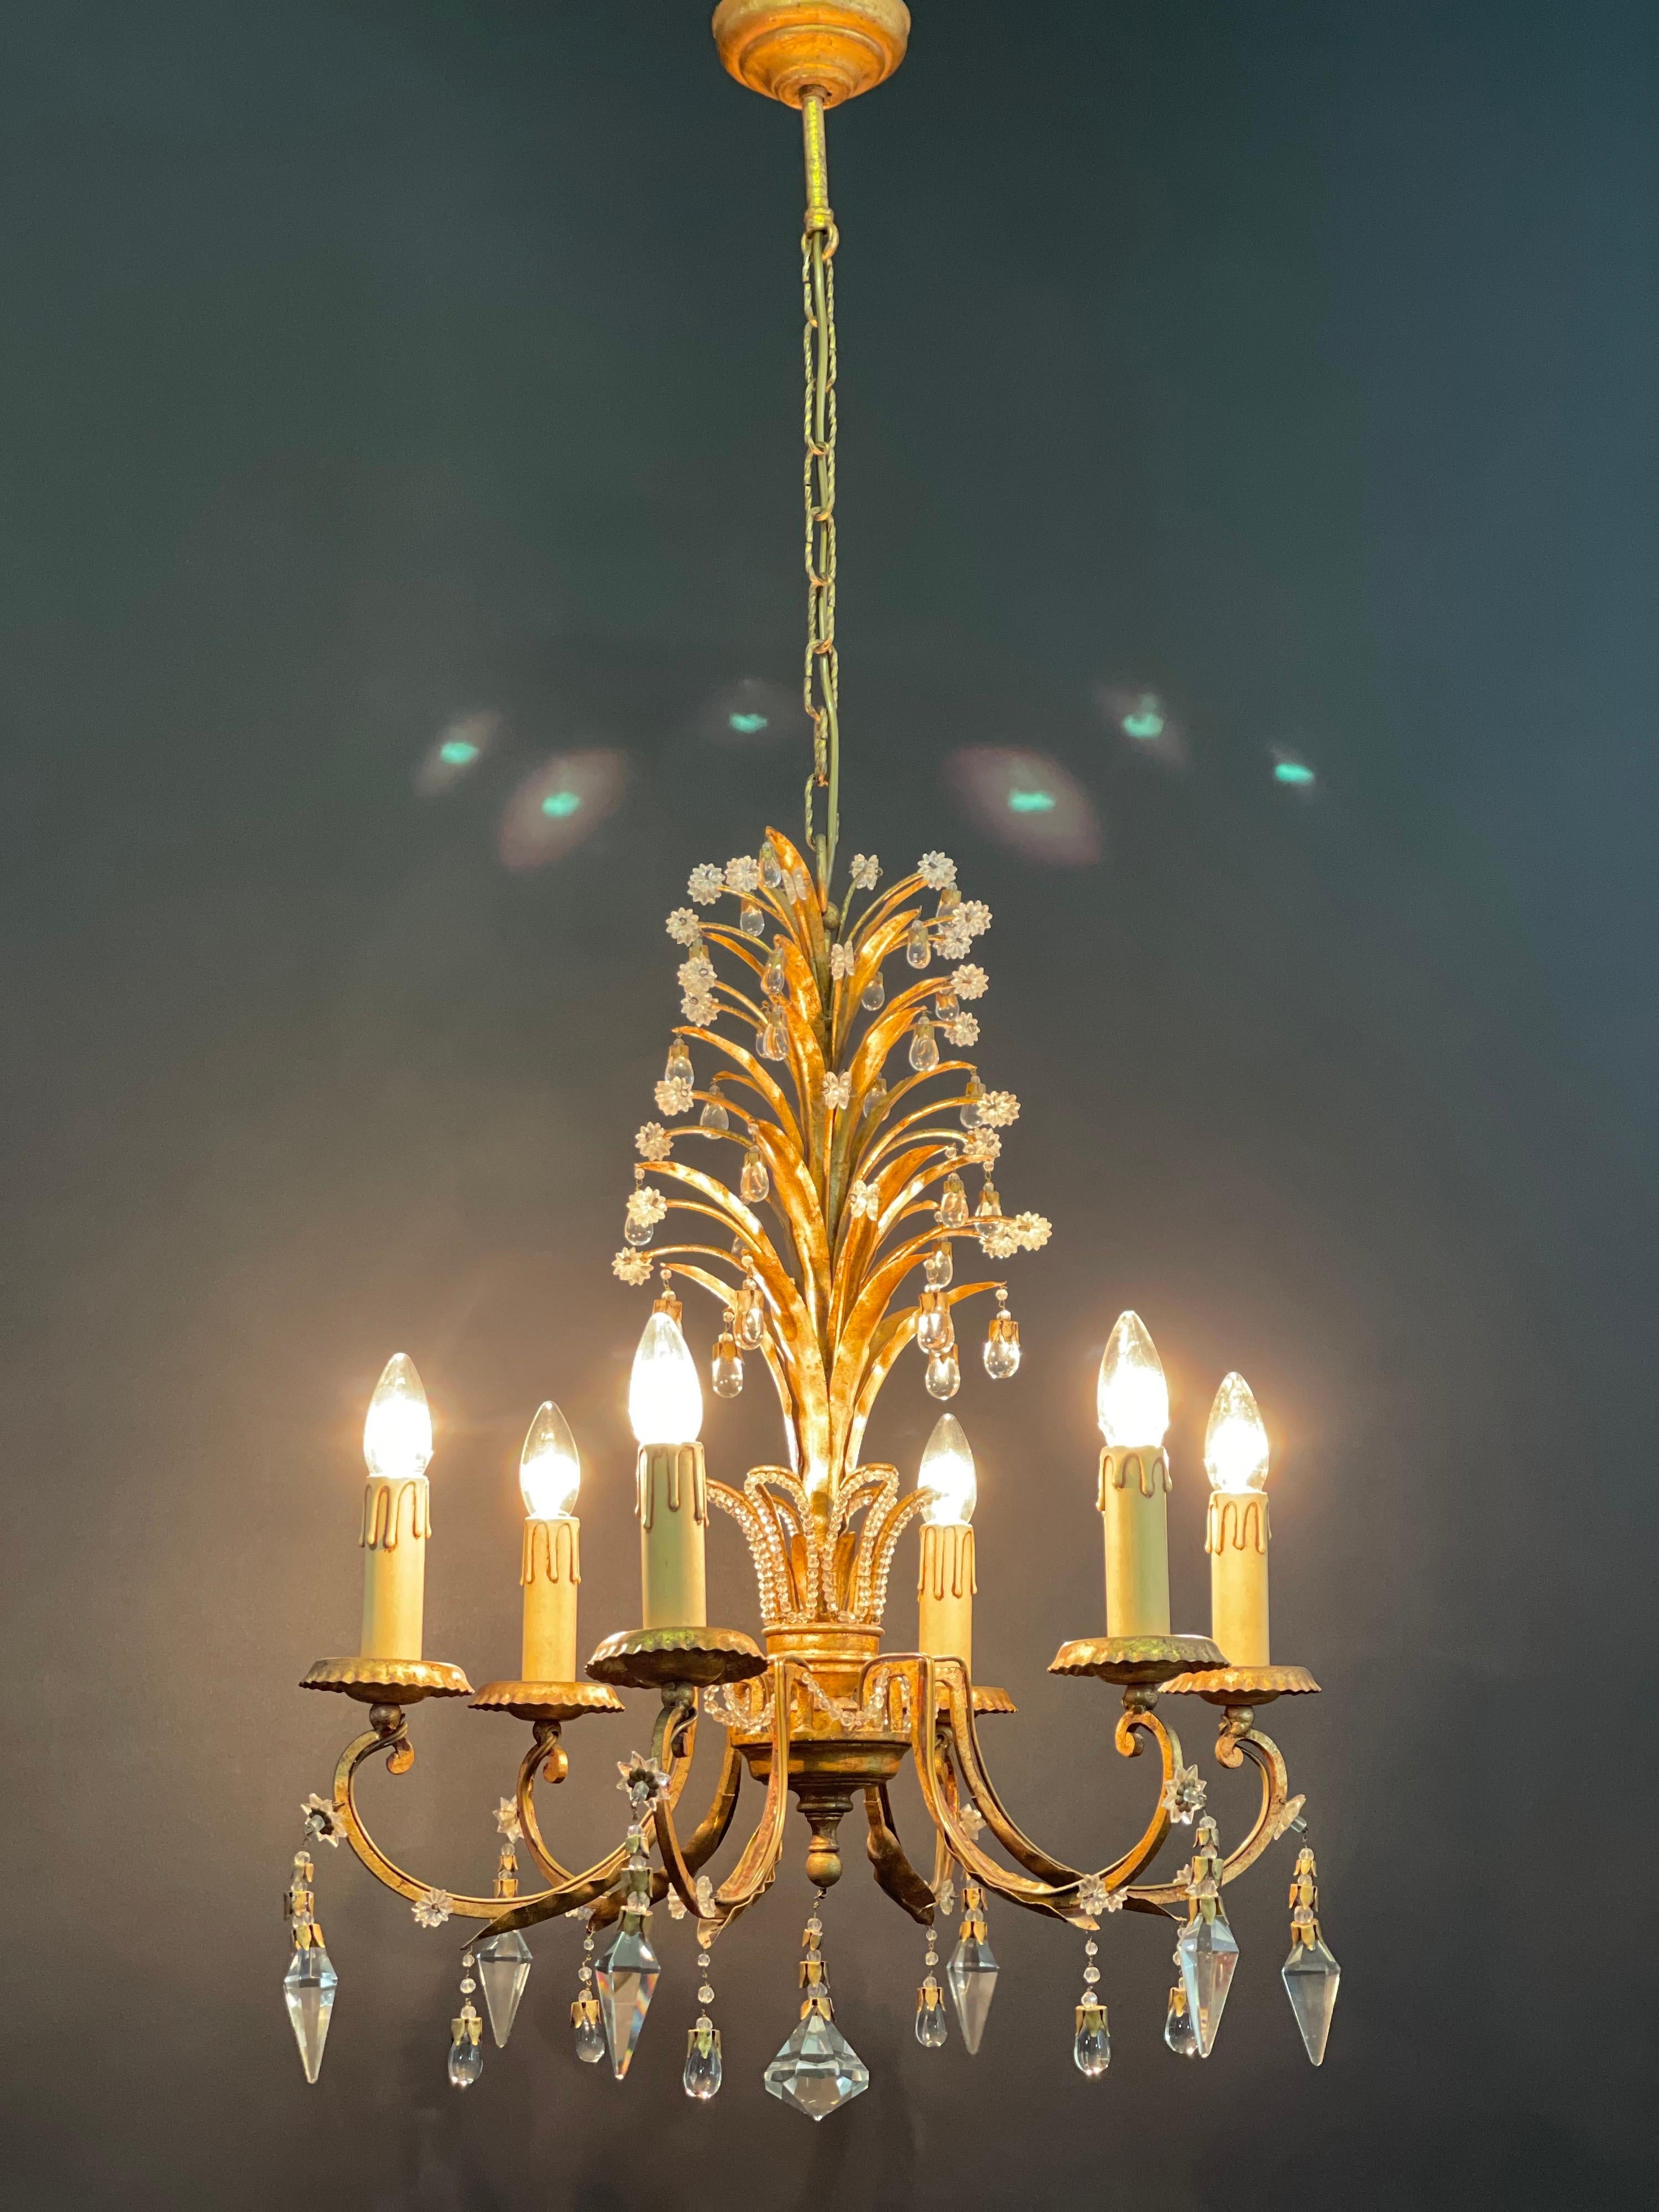 Mid-Century Modern Italian Gilt Iron and Lead Crystal Chandelier by G.Banci,  circa 1970s For Sale